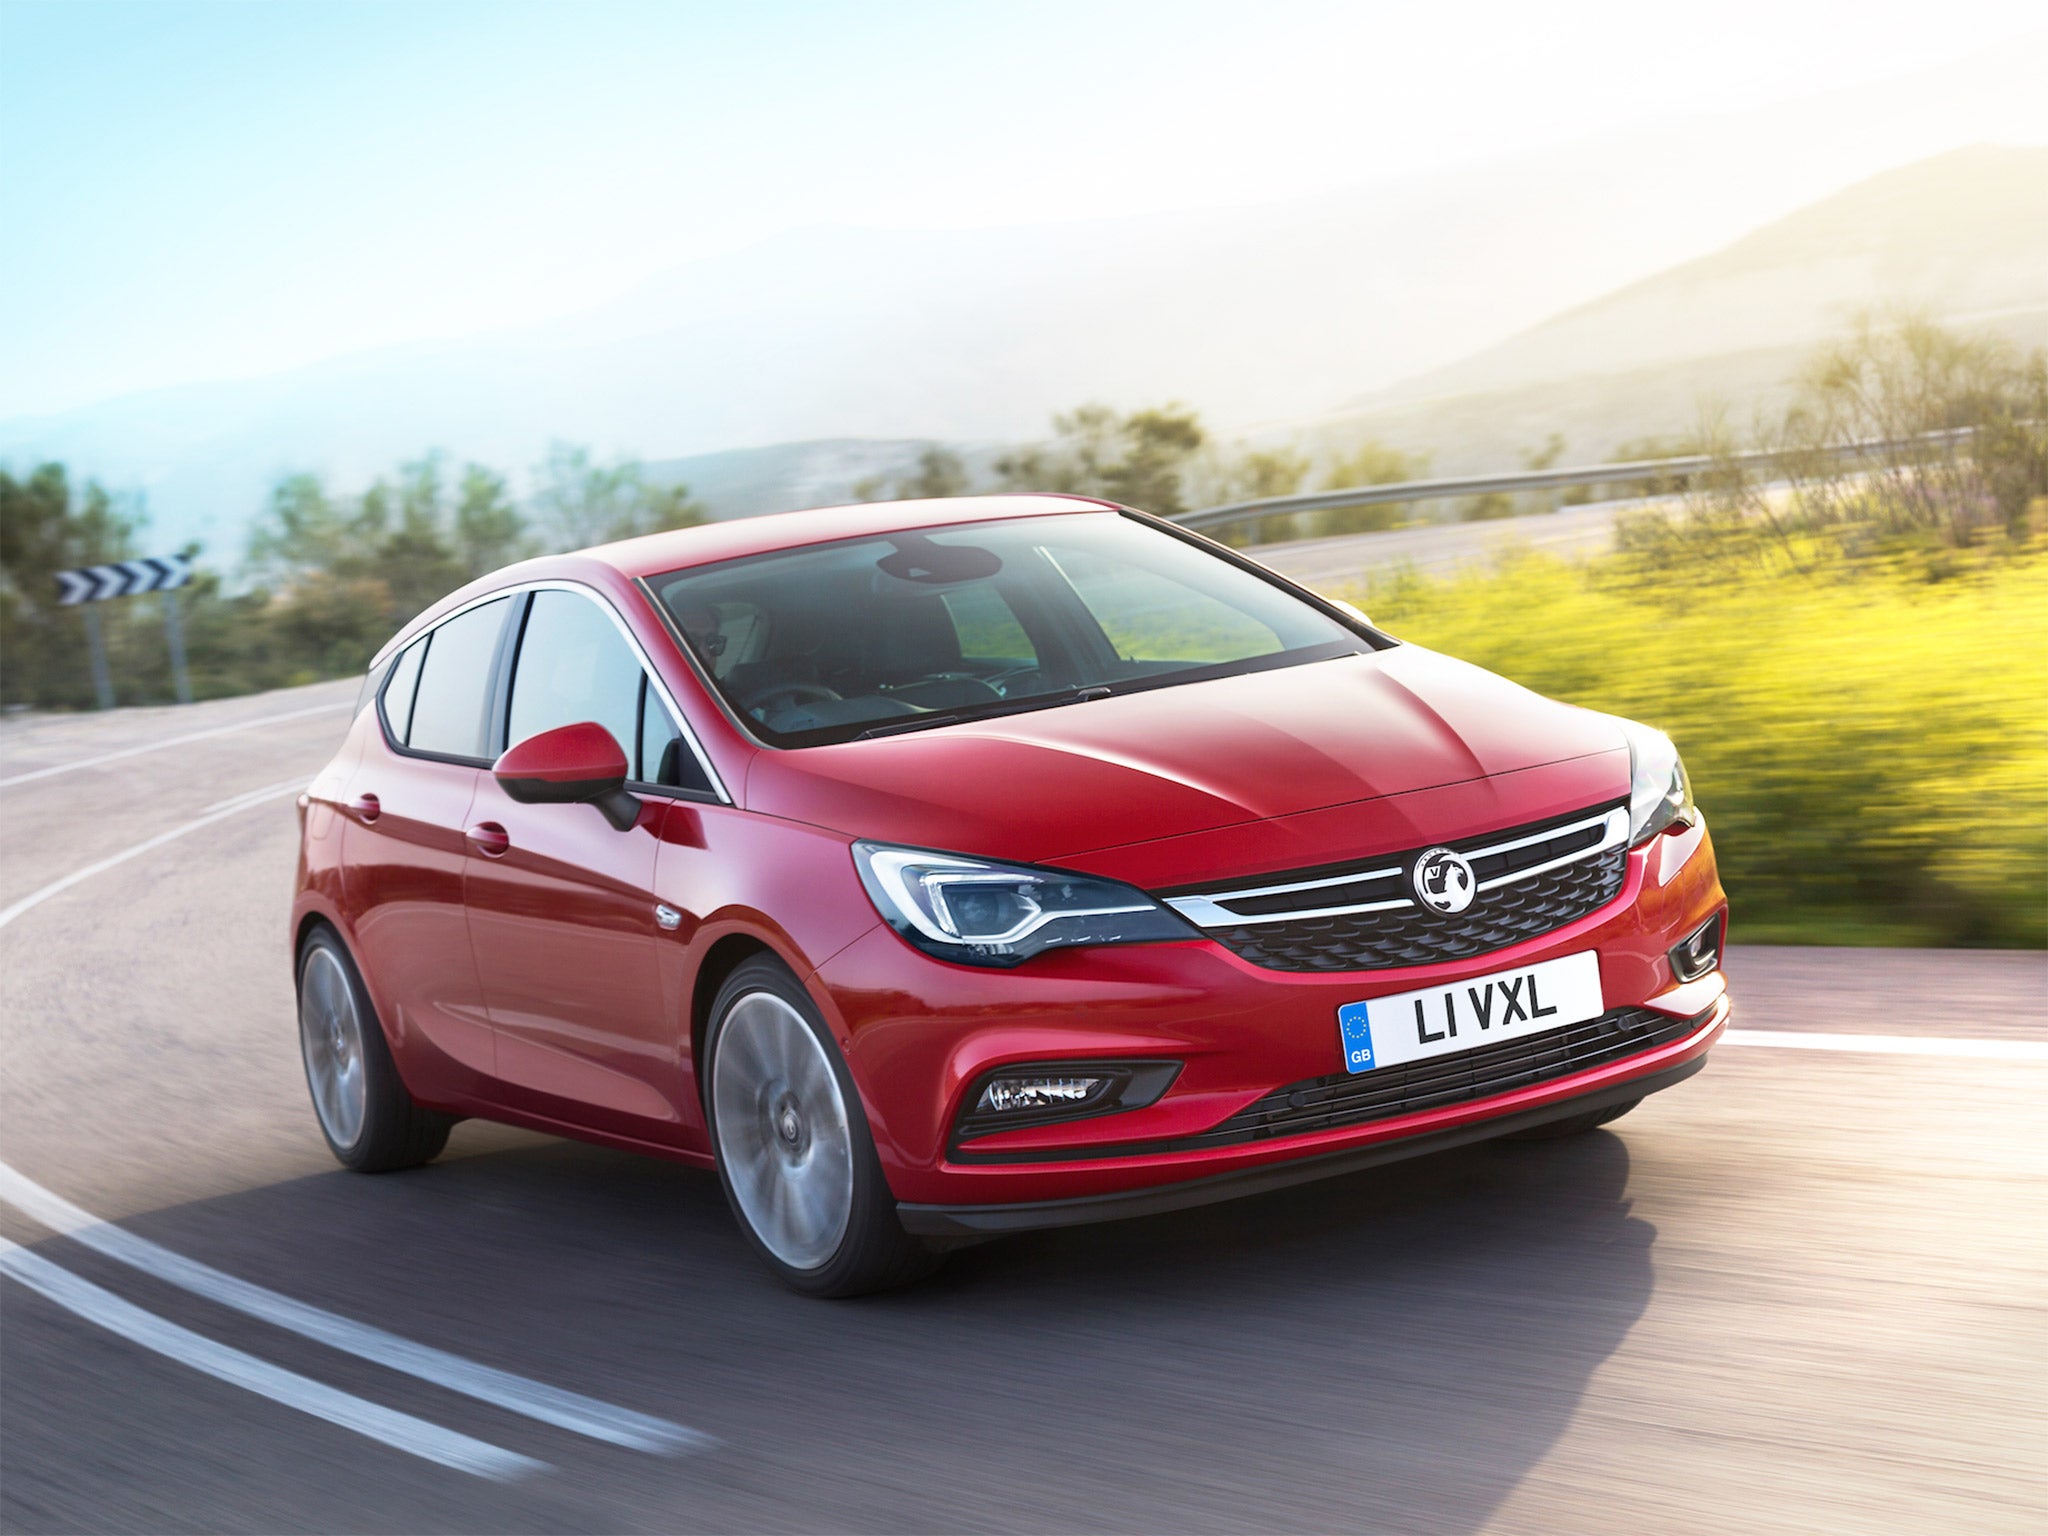 Vauxhall Astra Old Model - Vauxhall Astra Review